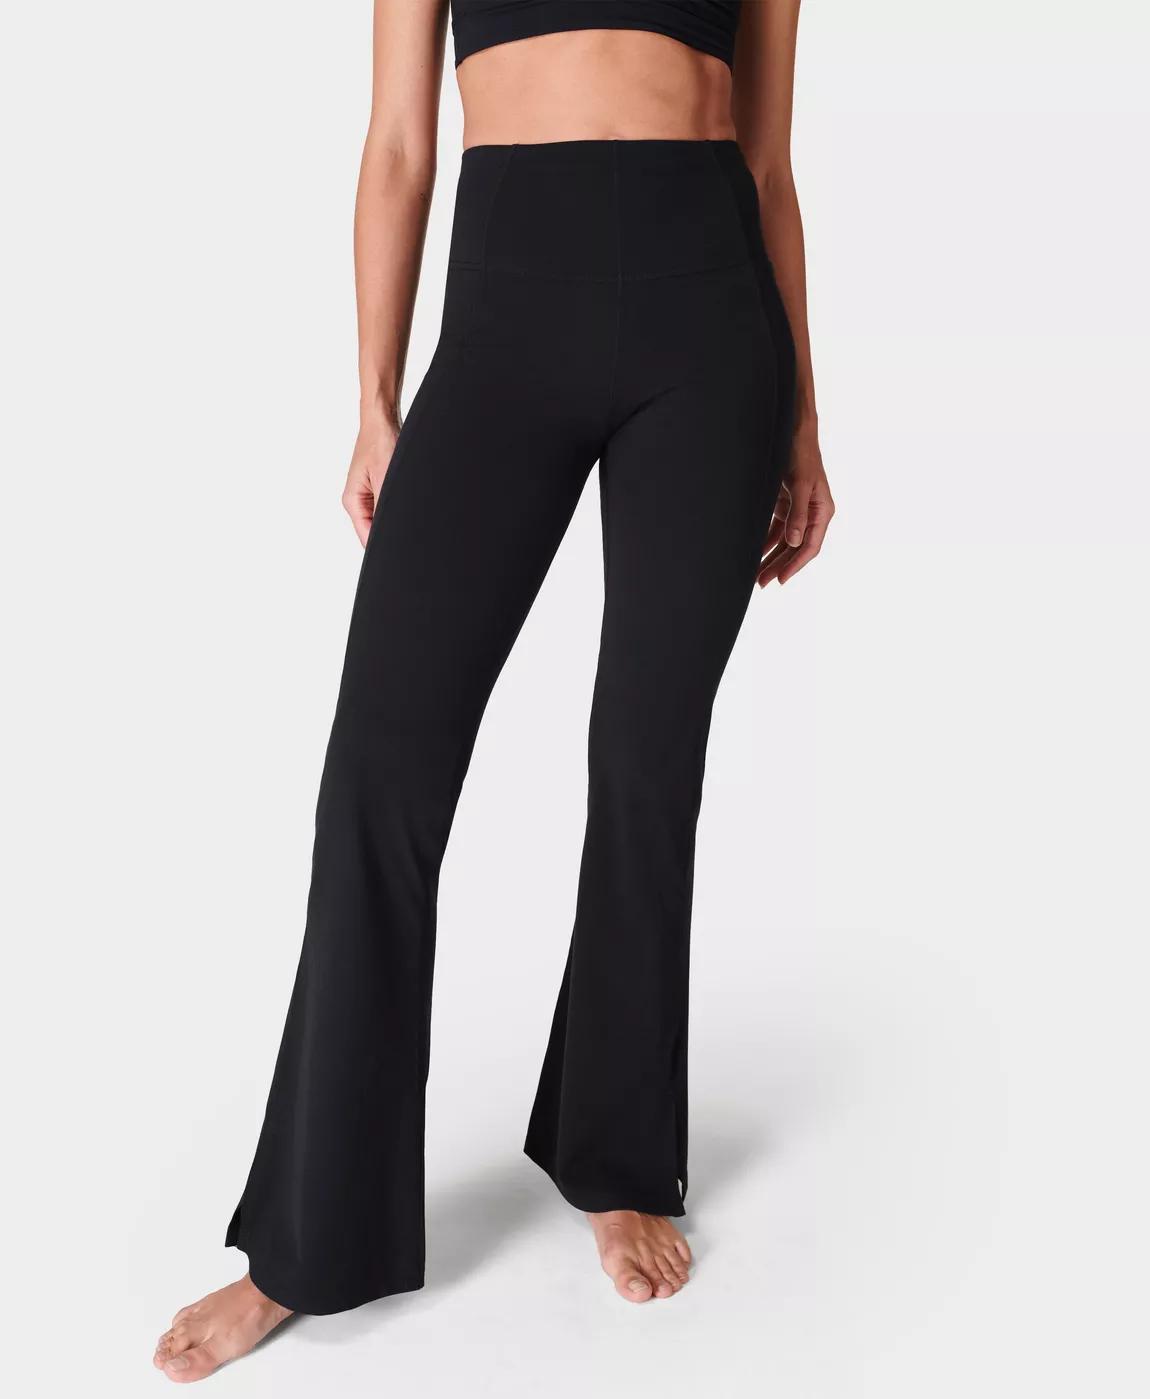 yoga trousers womens - Should yoga pants be tight or loose